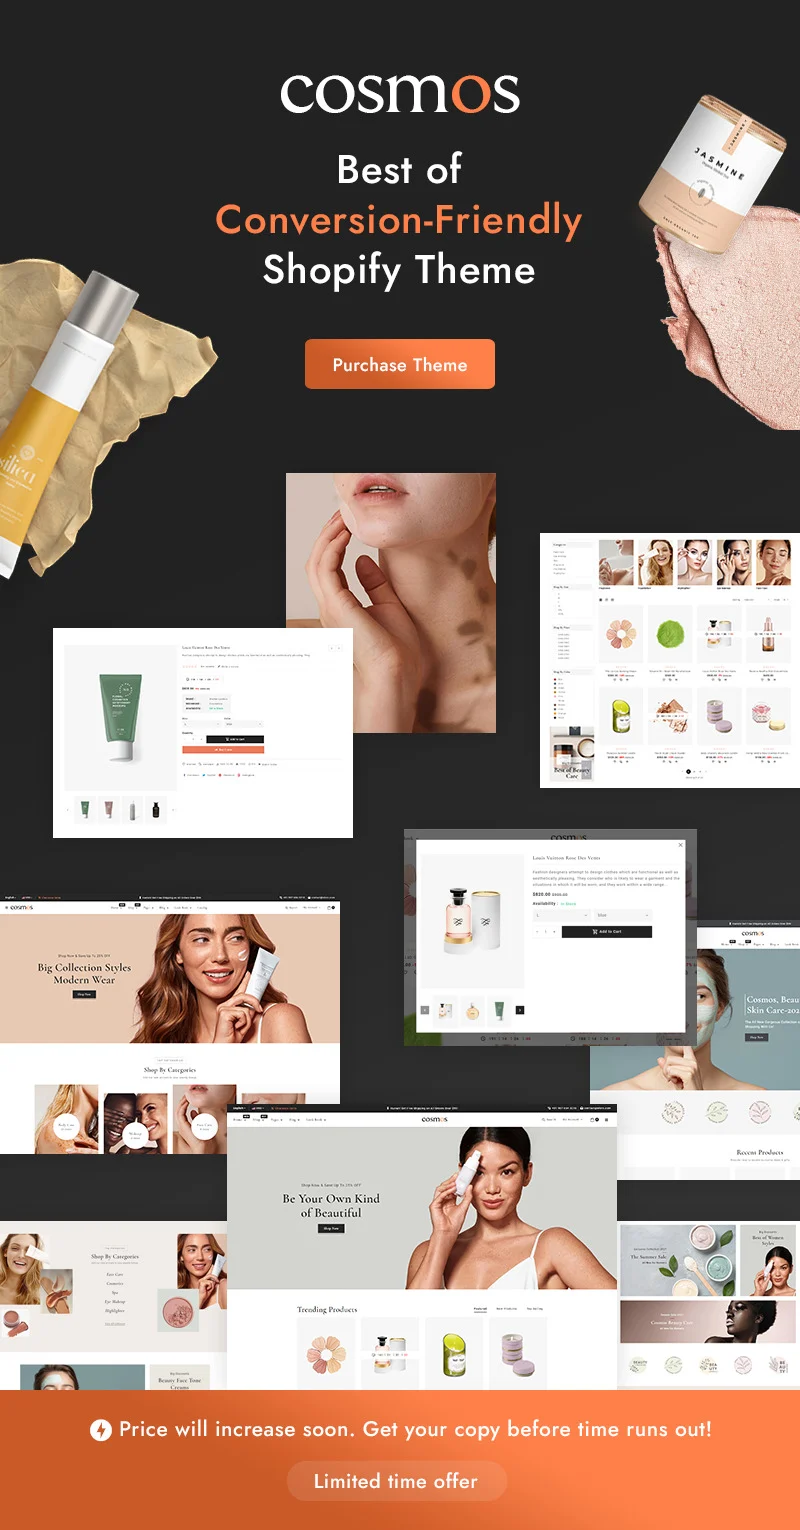 White and orange lettering "Cosmos Best of Conversion-Friendly Shopify Theme" and different pages of cosmetics store on a black background.